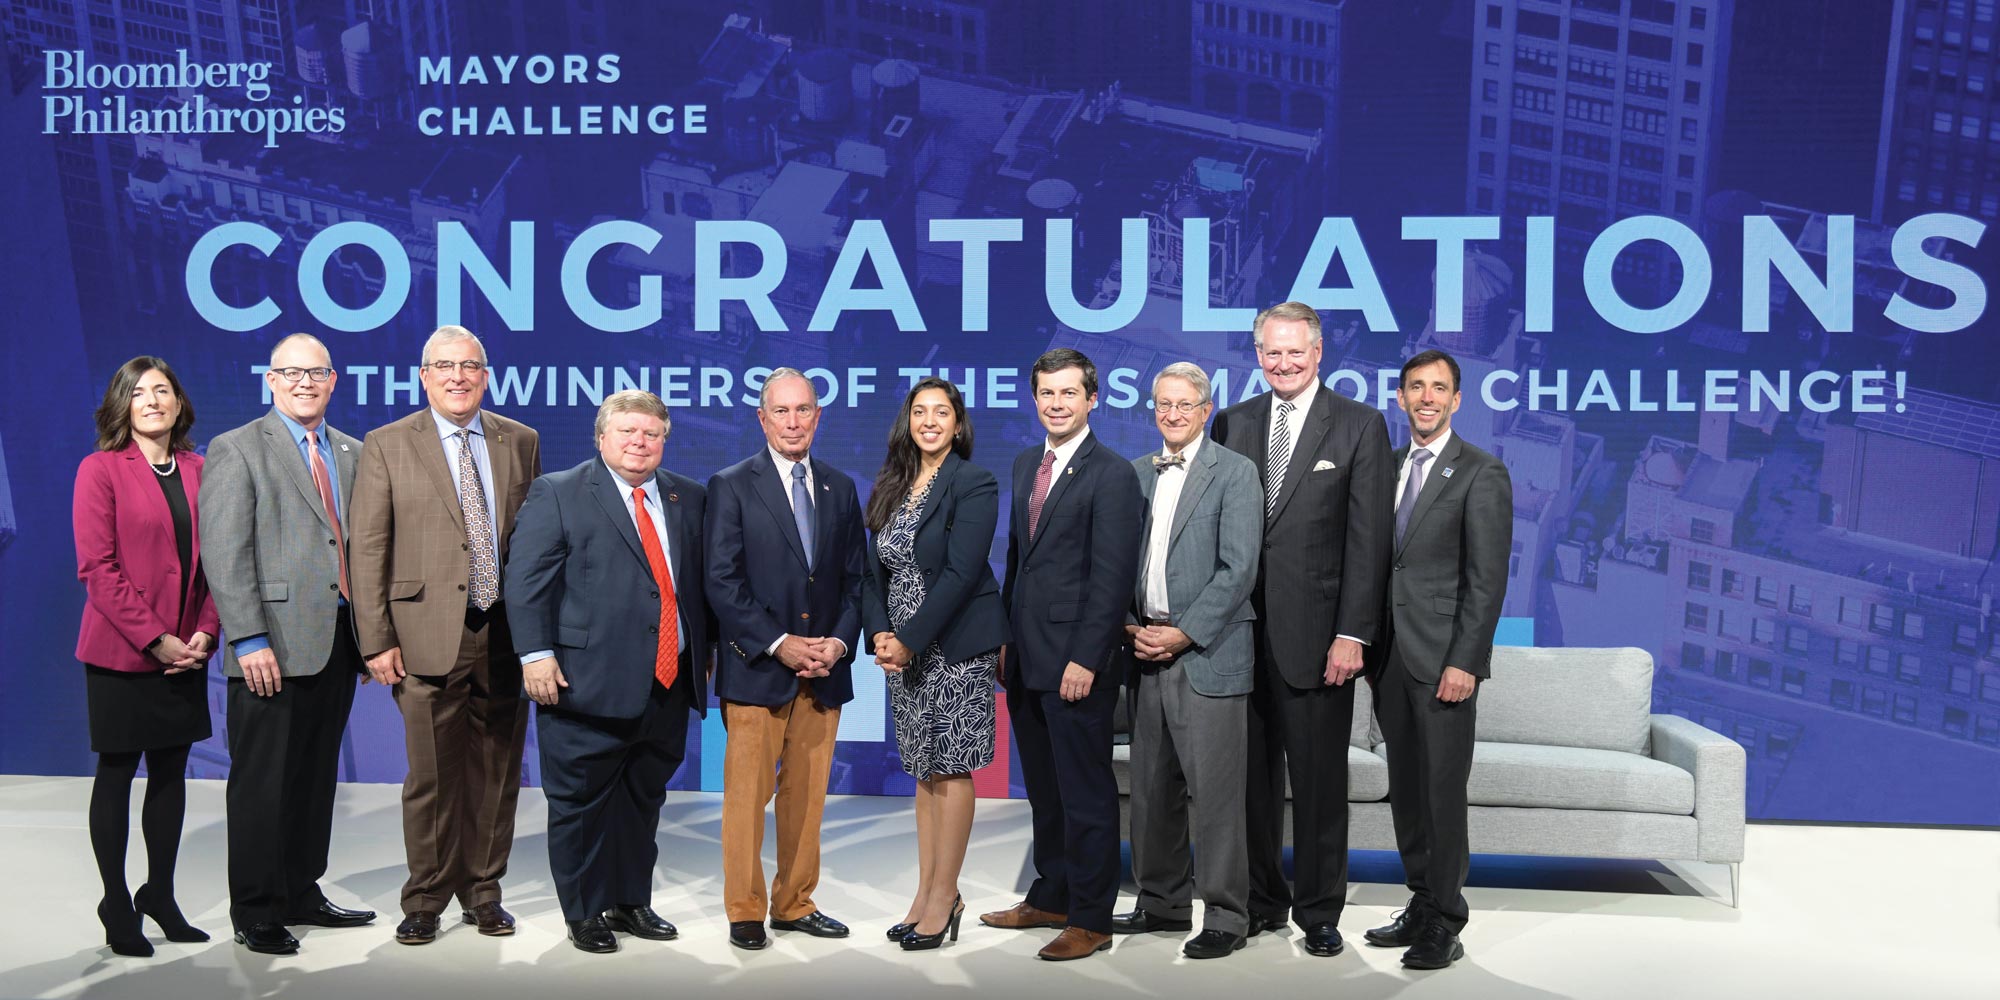 Mayors and representatives of the winning cities in the 2018 Mayors Challenge join Mike Bloomberg onstage at CityLab 2018 in Detroit, Michigan.